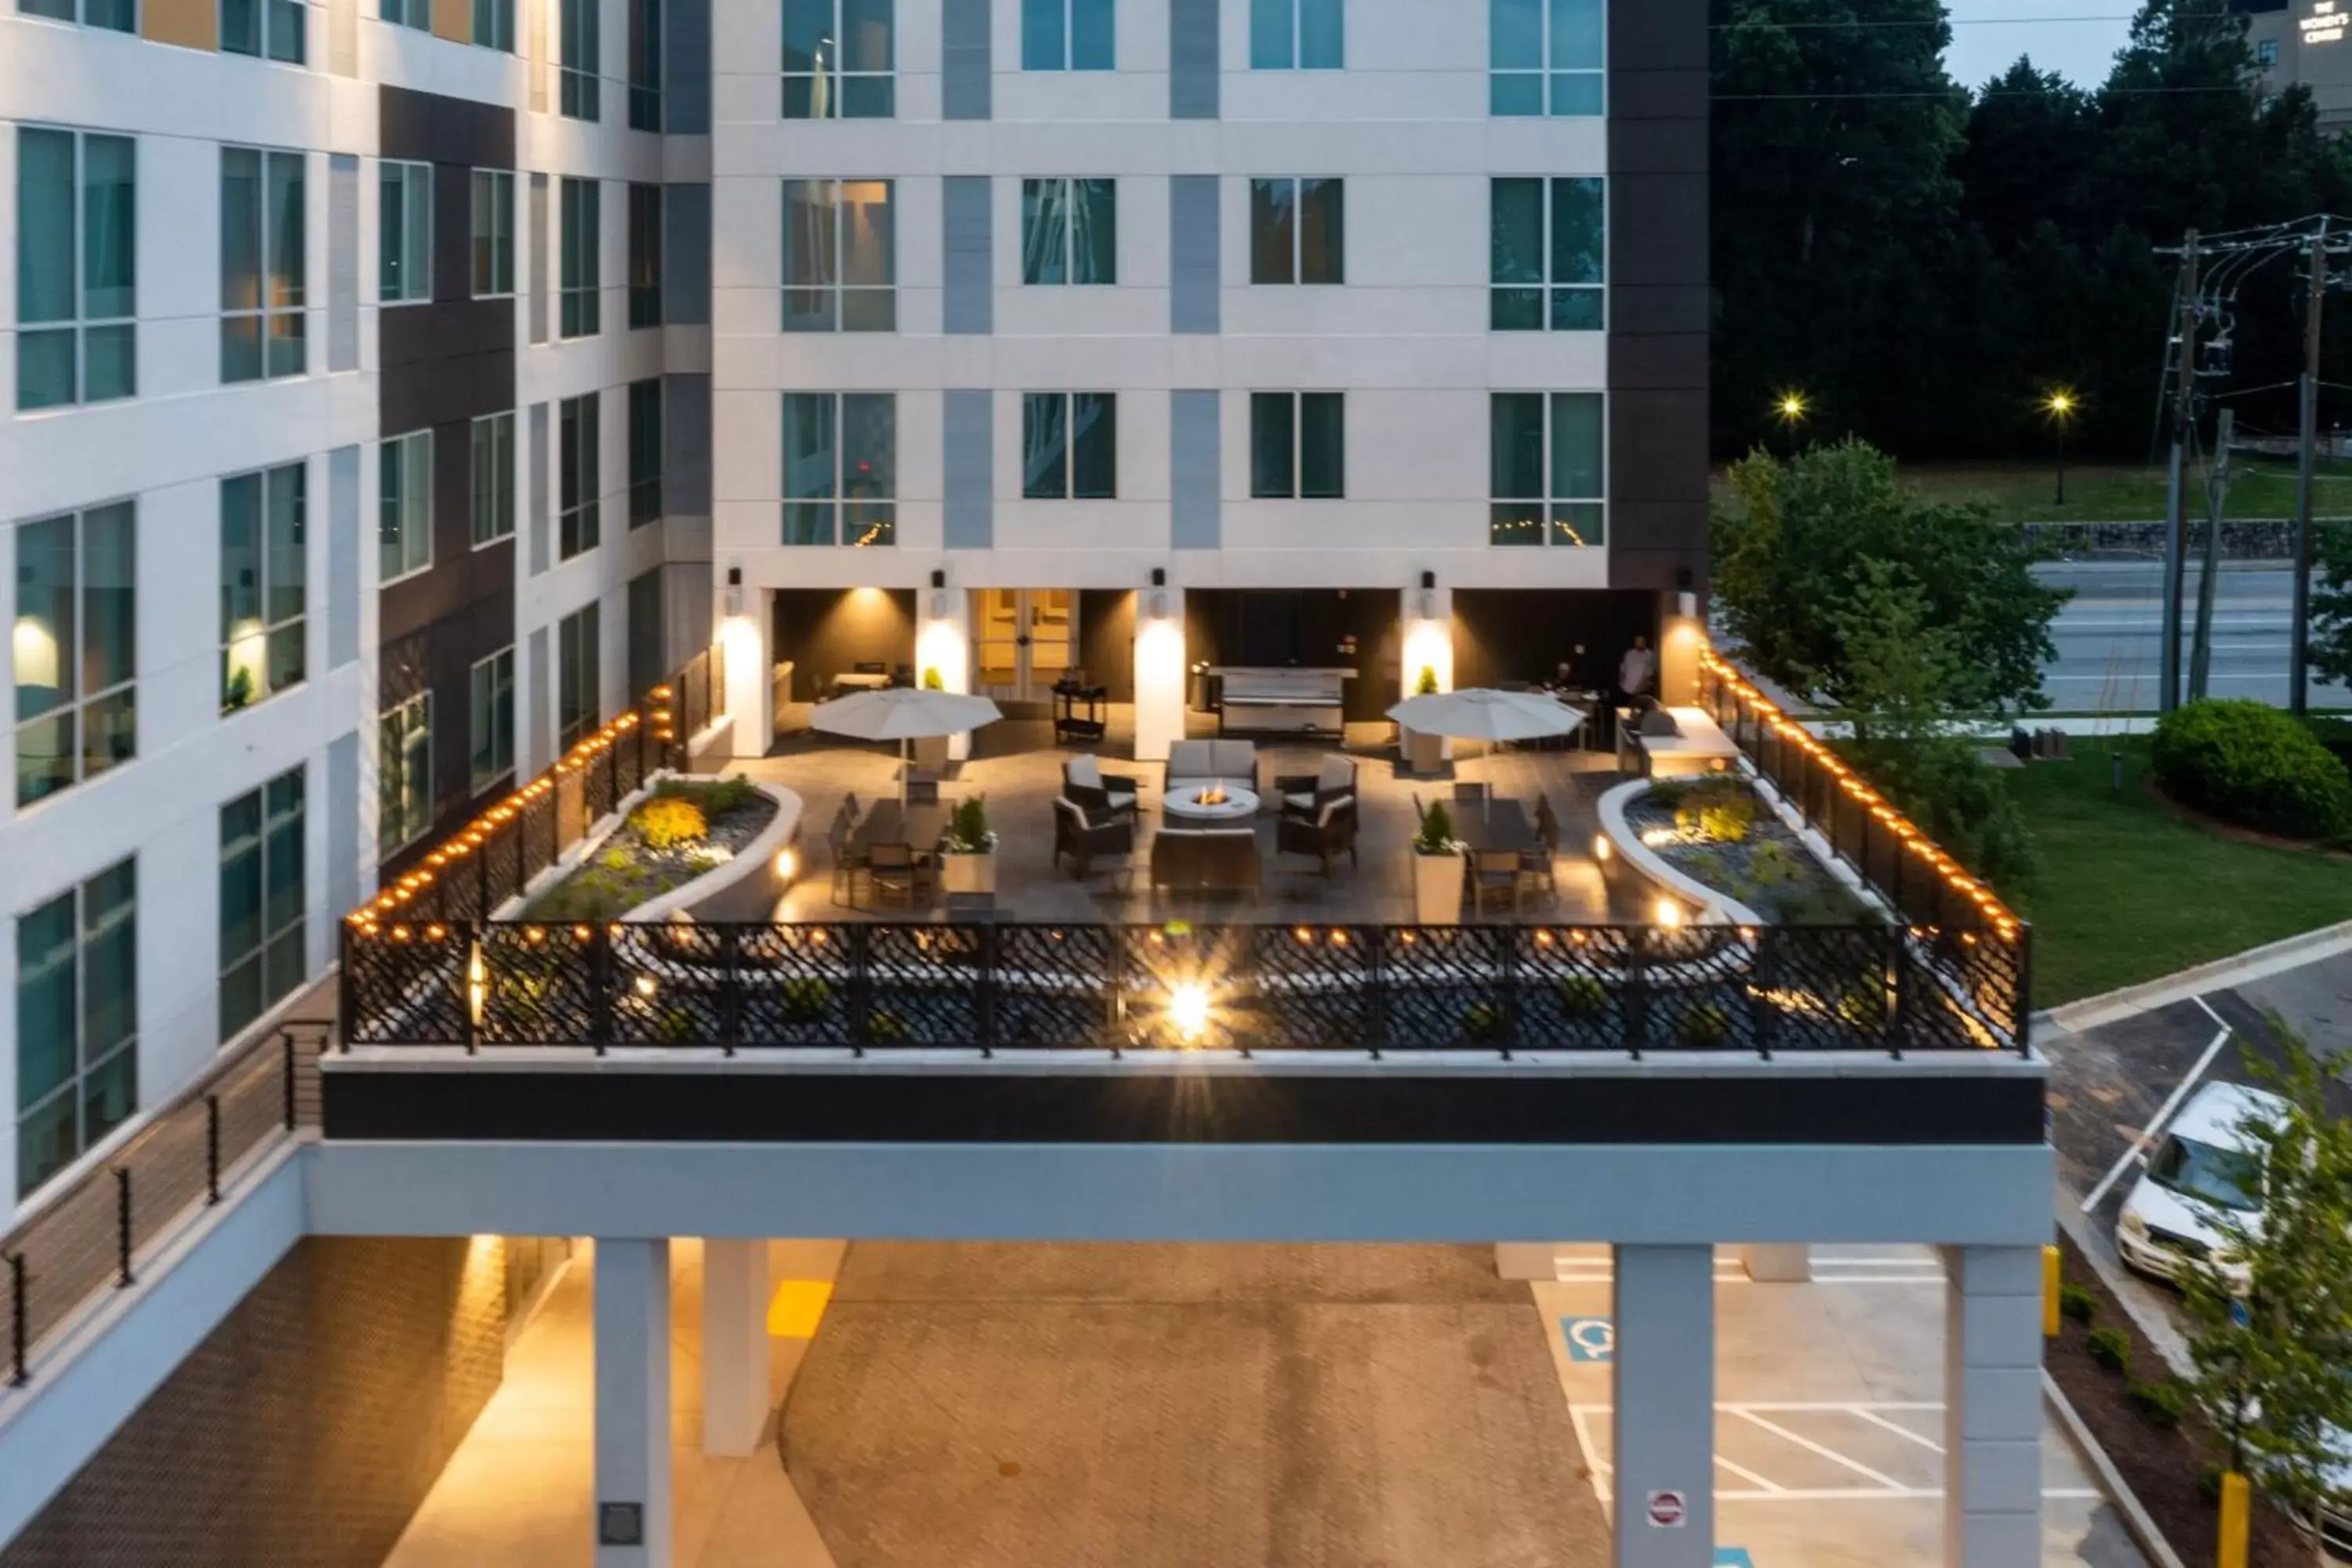 Property building in Residence Inn by Marriott Decatur Emory Area